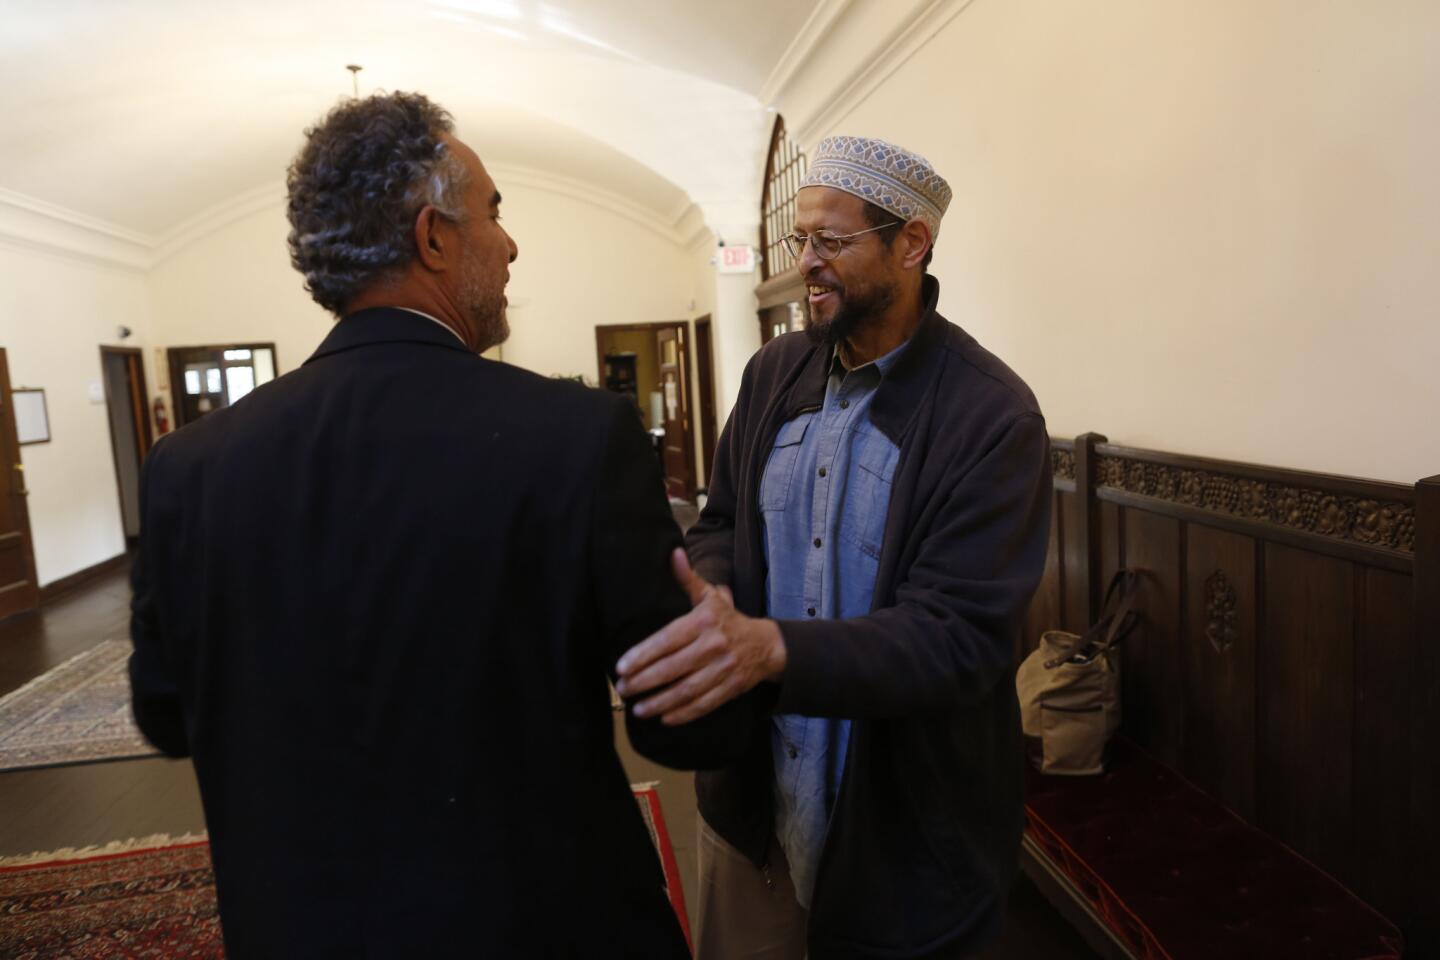 Imam Zaid Shakir, co-founder of Zaytuna College, the only Muslim liberal arts college in the U.S., greets visiting Imam Aziz Eddebbarh, from Las Vegas.